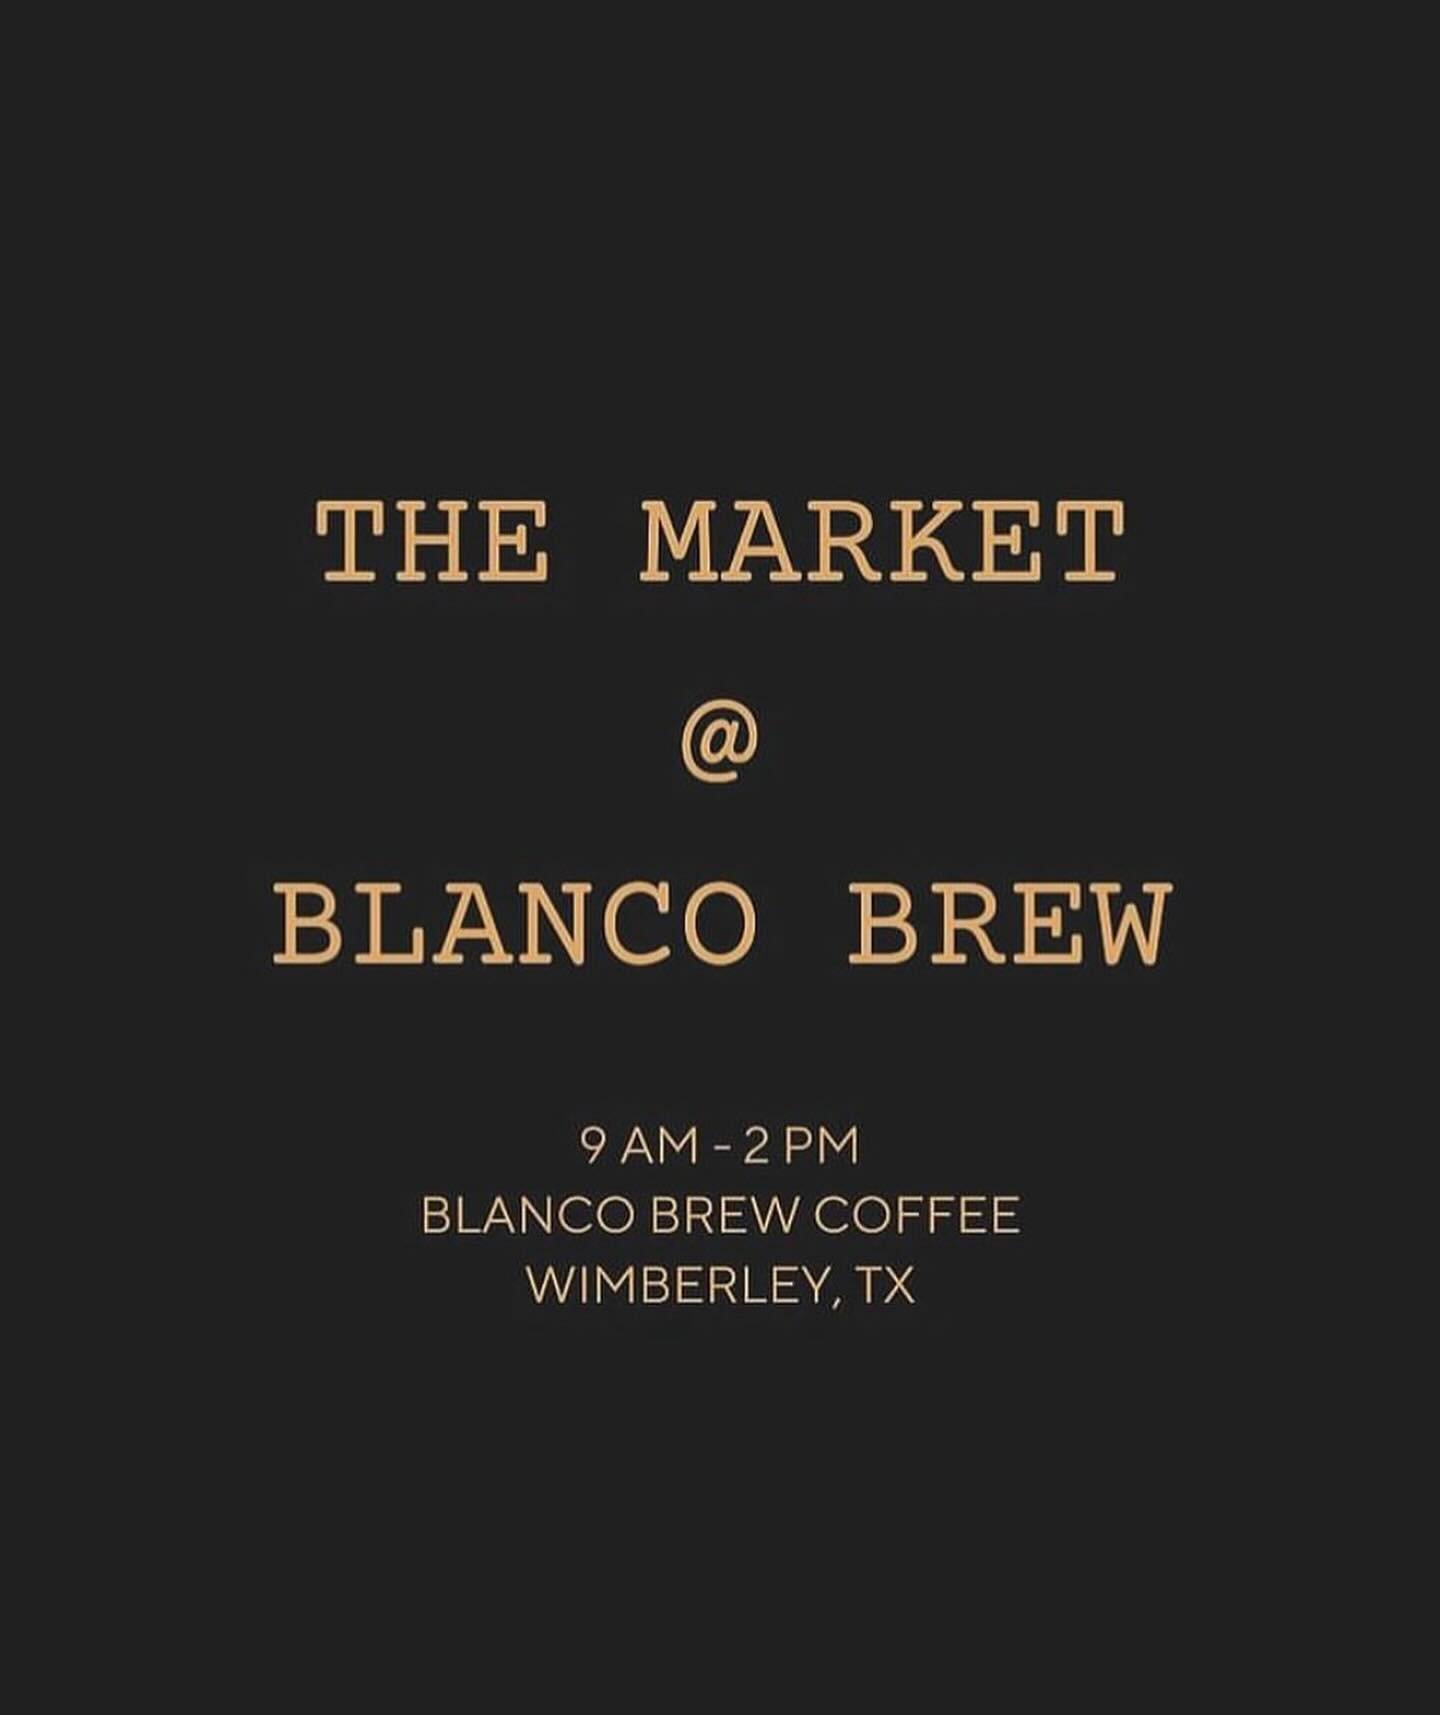 We re setup and ready to go for the market @blancobrew_tx 🙏🏽💚 See you soon!